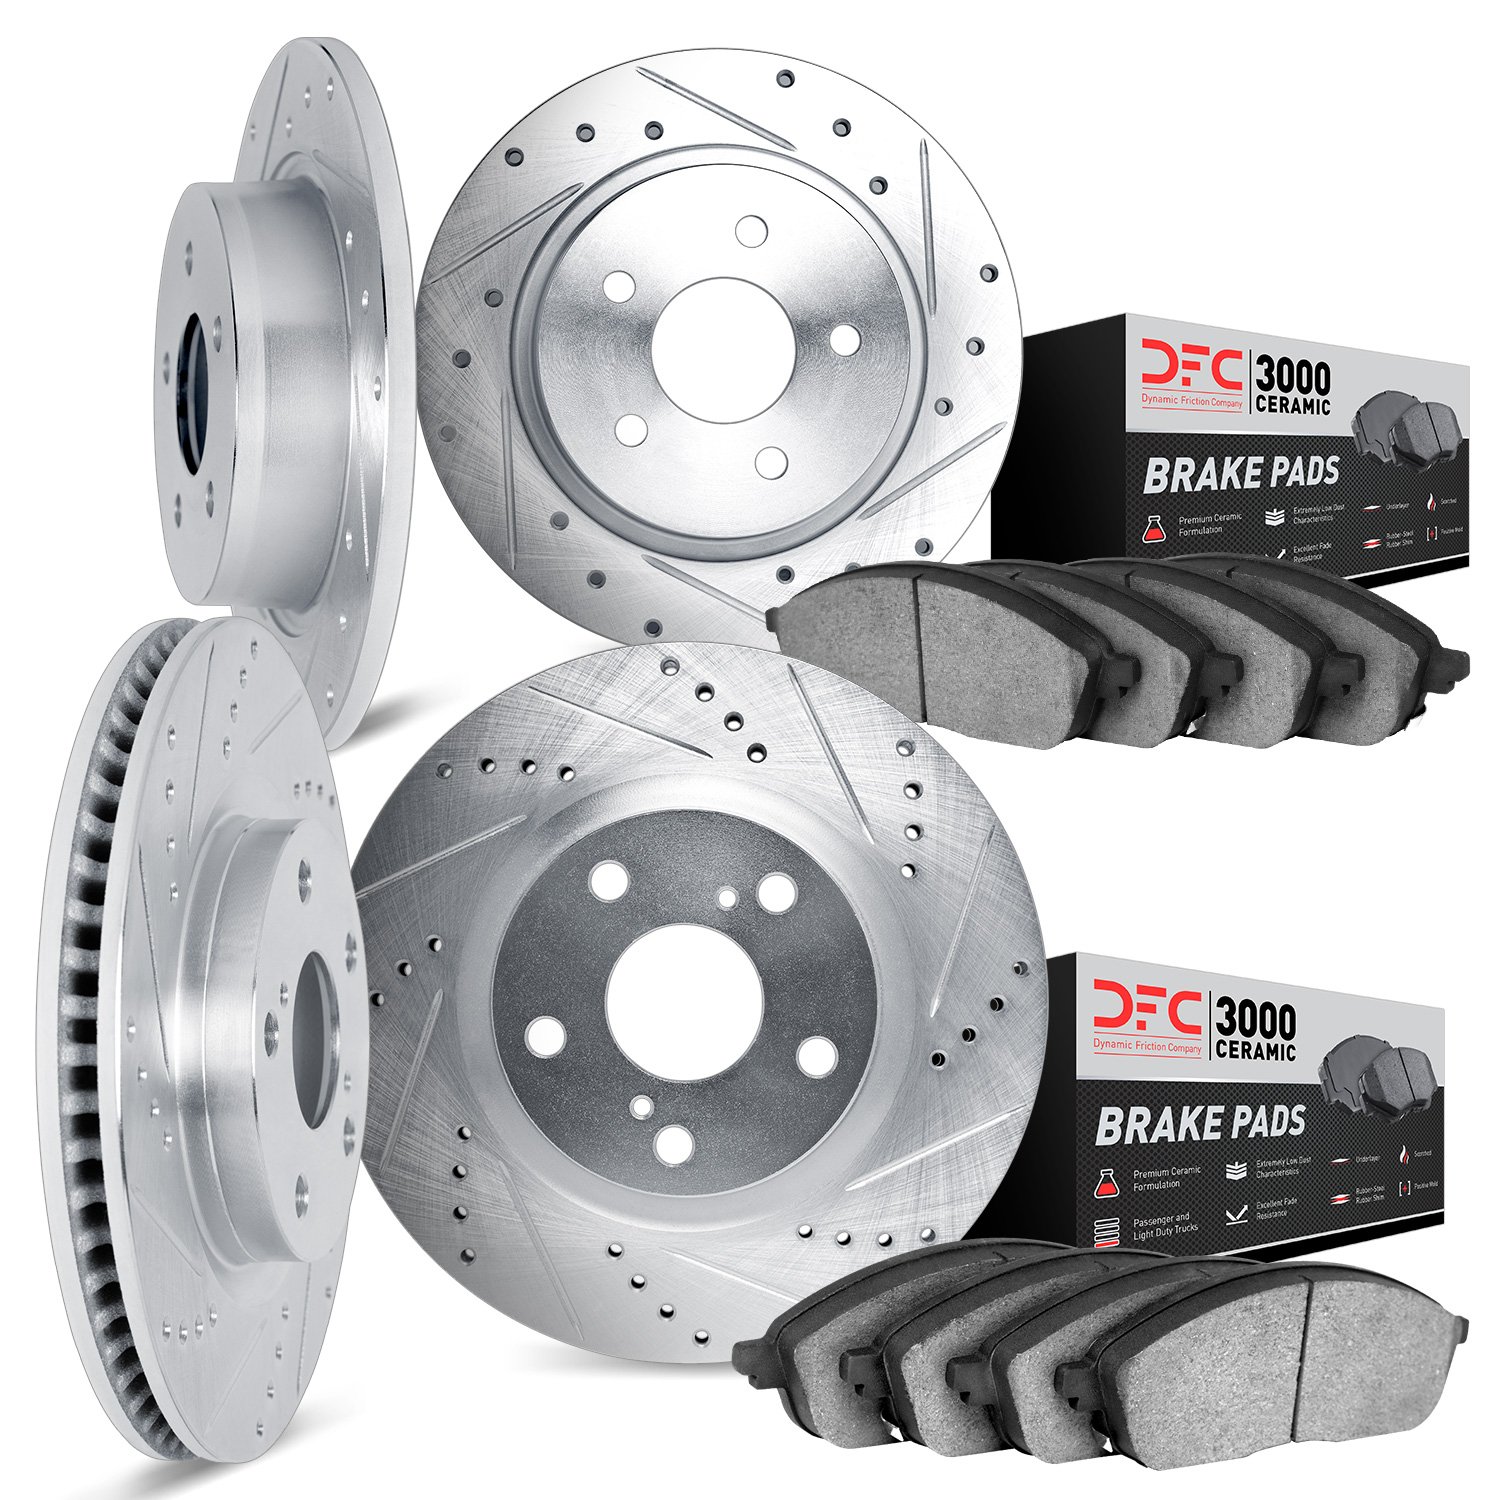 7304-80041 Drilled/Slotted Brake Rotor with 3000-Series Ceramic Brake Pads Kit [Silver], 2016-2018 Ford/Lincoln/Mercury/Mazda, P